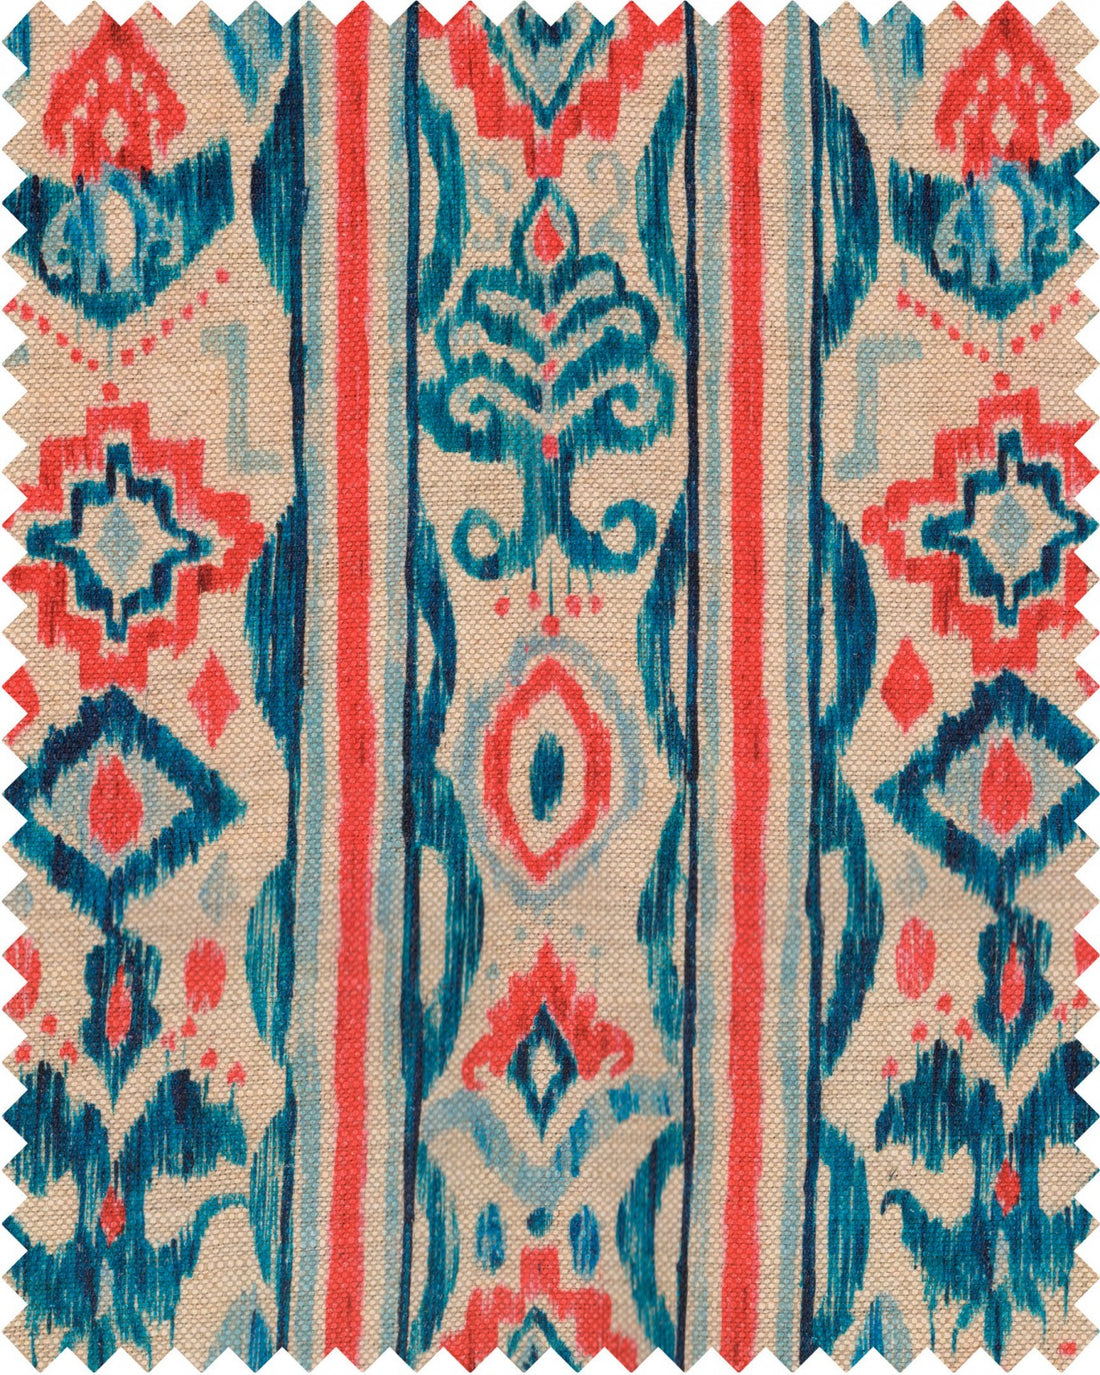 Mediterraneo Ikat fabric in white red indigo color - pattern number FB00062 - by Mind The Gap in the Sundance Villa collection